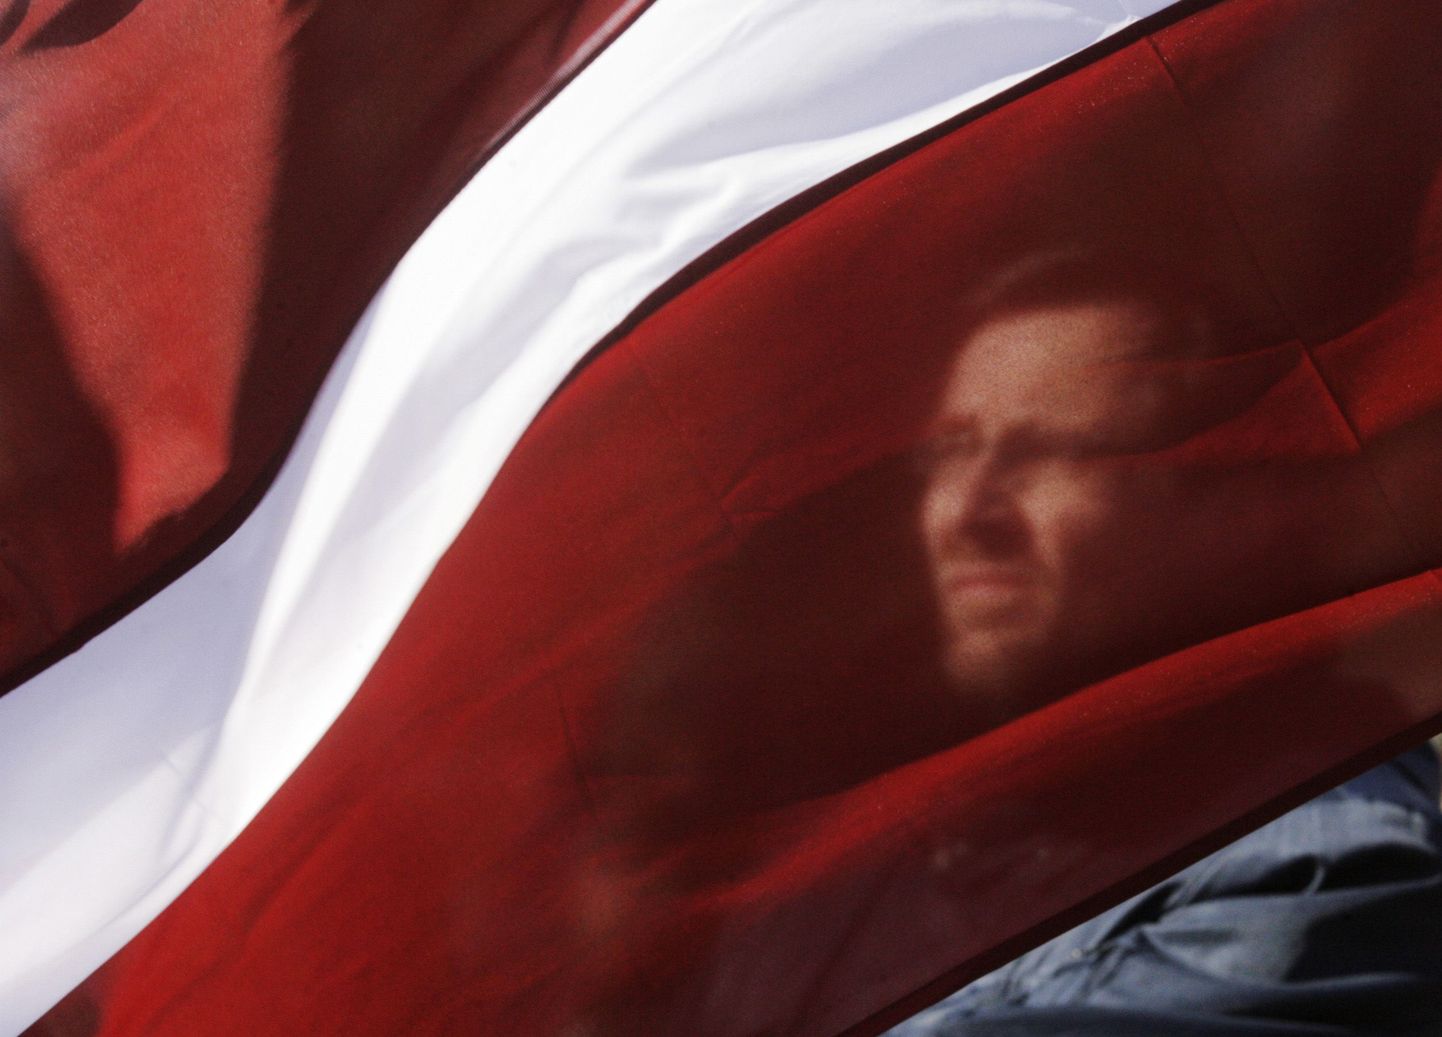 A man holds a Latvian national flag during a procession commemorating the Latvian Waffen SS unit, also known as the Legionnaires, in Riga March 16, 2011. The Legionnaires are being commemorated for fighting against the Soviet occupation of Latvia but the Nazi connection has caused great controversy abroad, particularly in Russia. About 1,000 people participated in the event, according to local media. REUTERS/Ints Kalnins (LATVIA - Tags: POLITICS CIVIL UNREST ANNIVERSARY MILITARY IMAGES OF THE DAY)